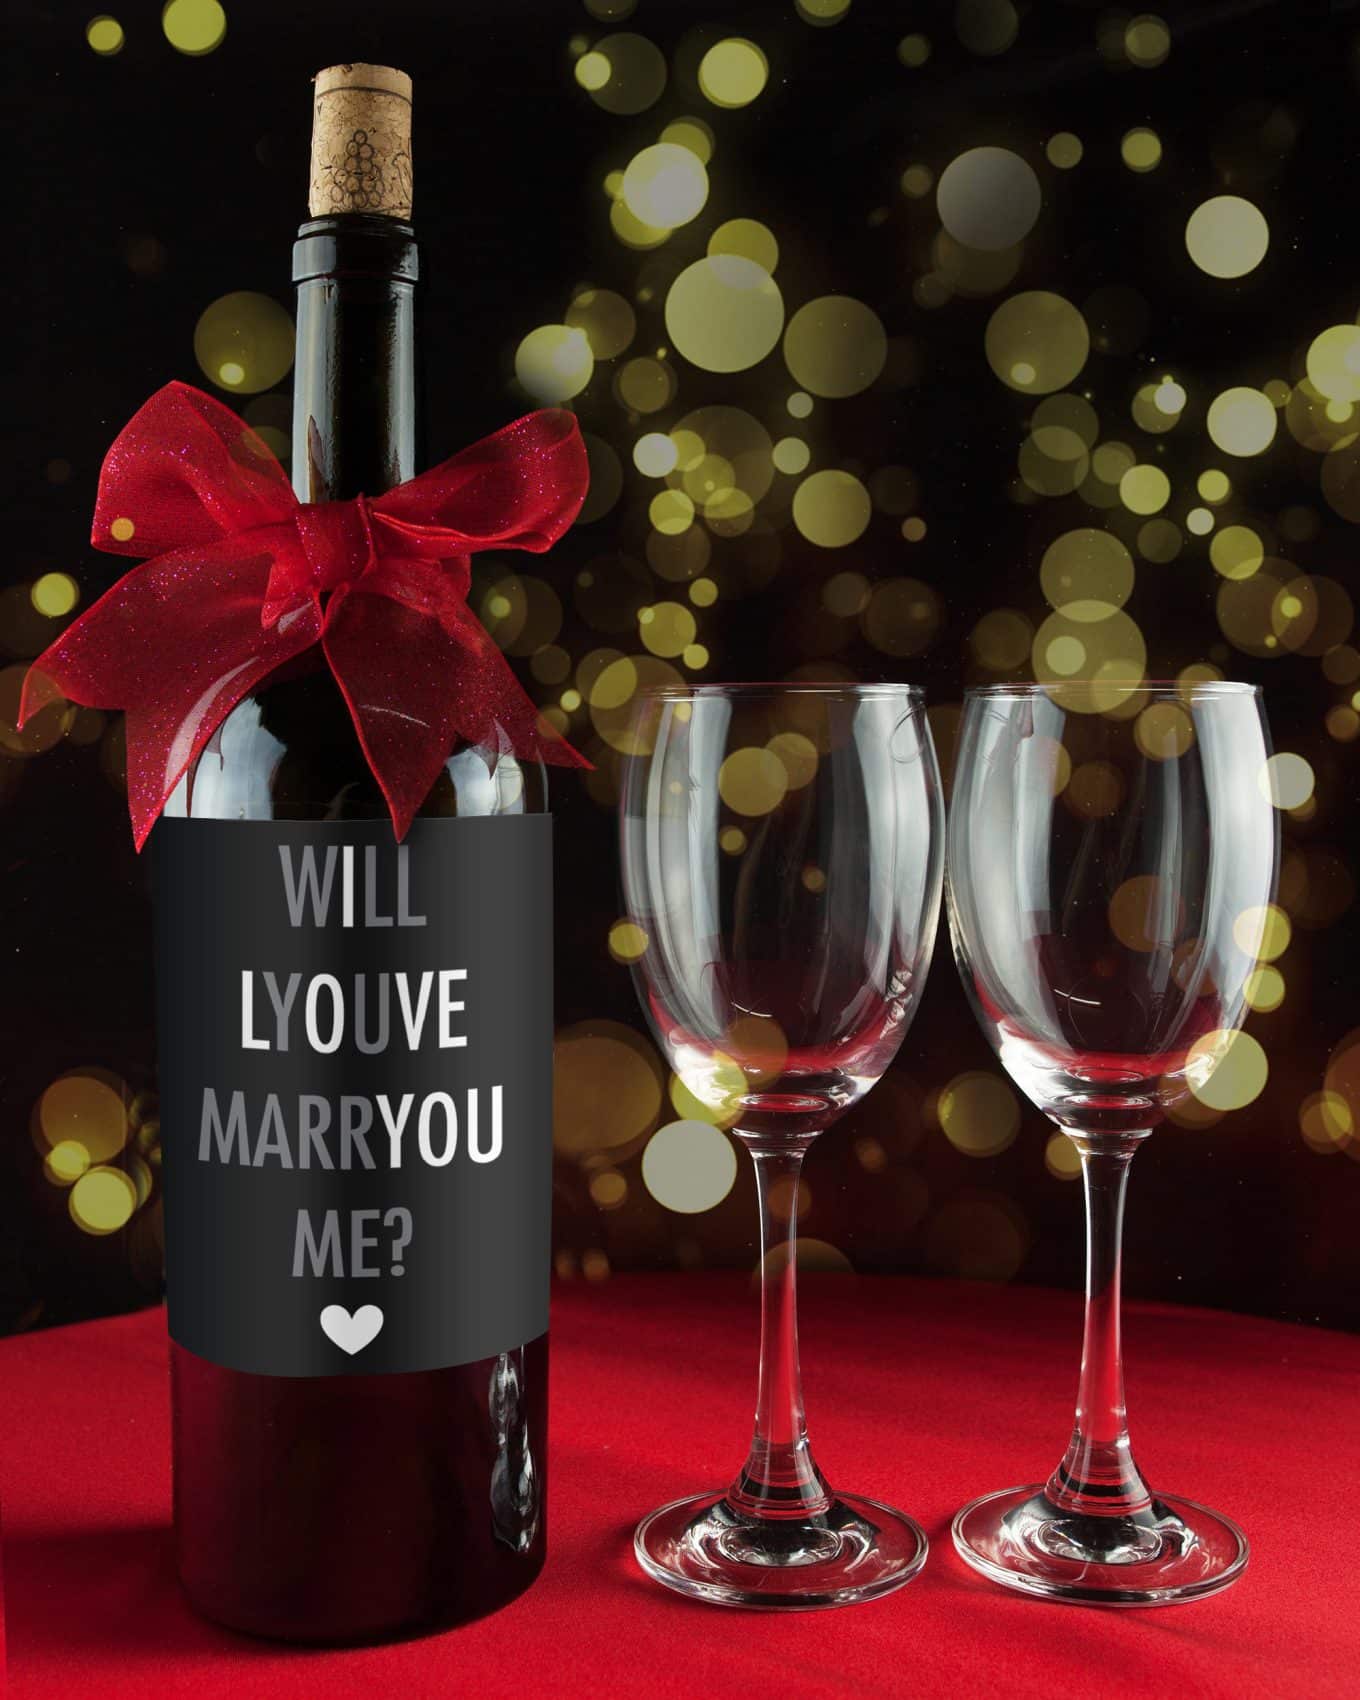 Will You Marry Me? I love you wine label. Surprise her with this custom wine label on a bottle of wine.